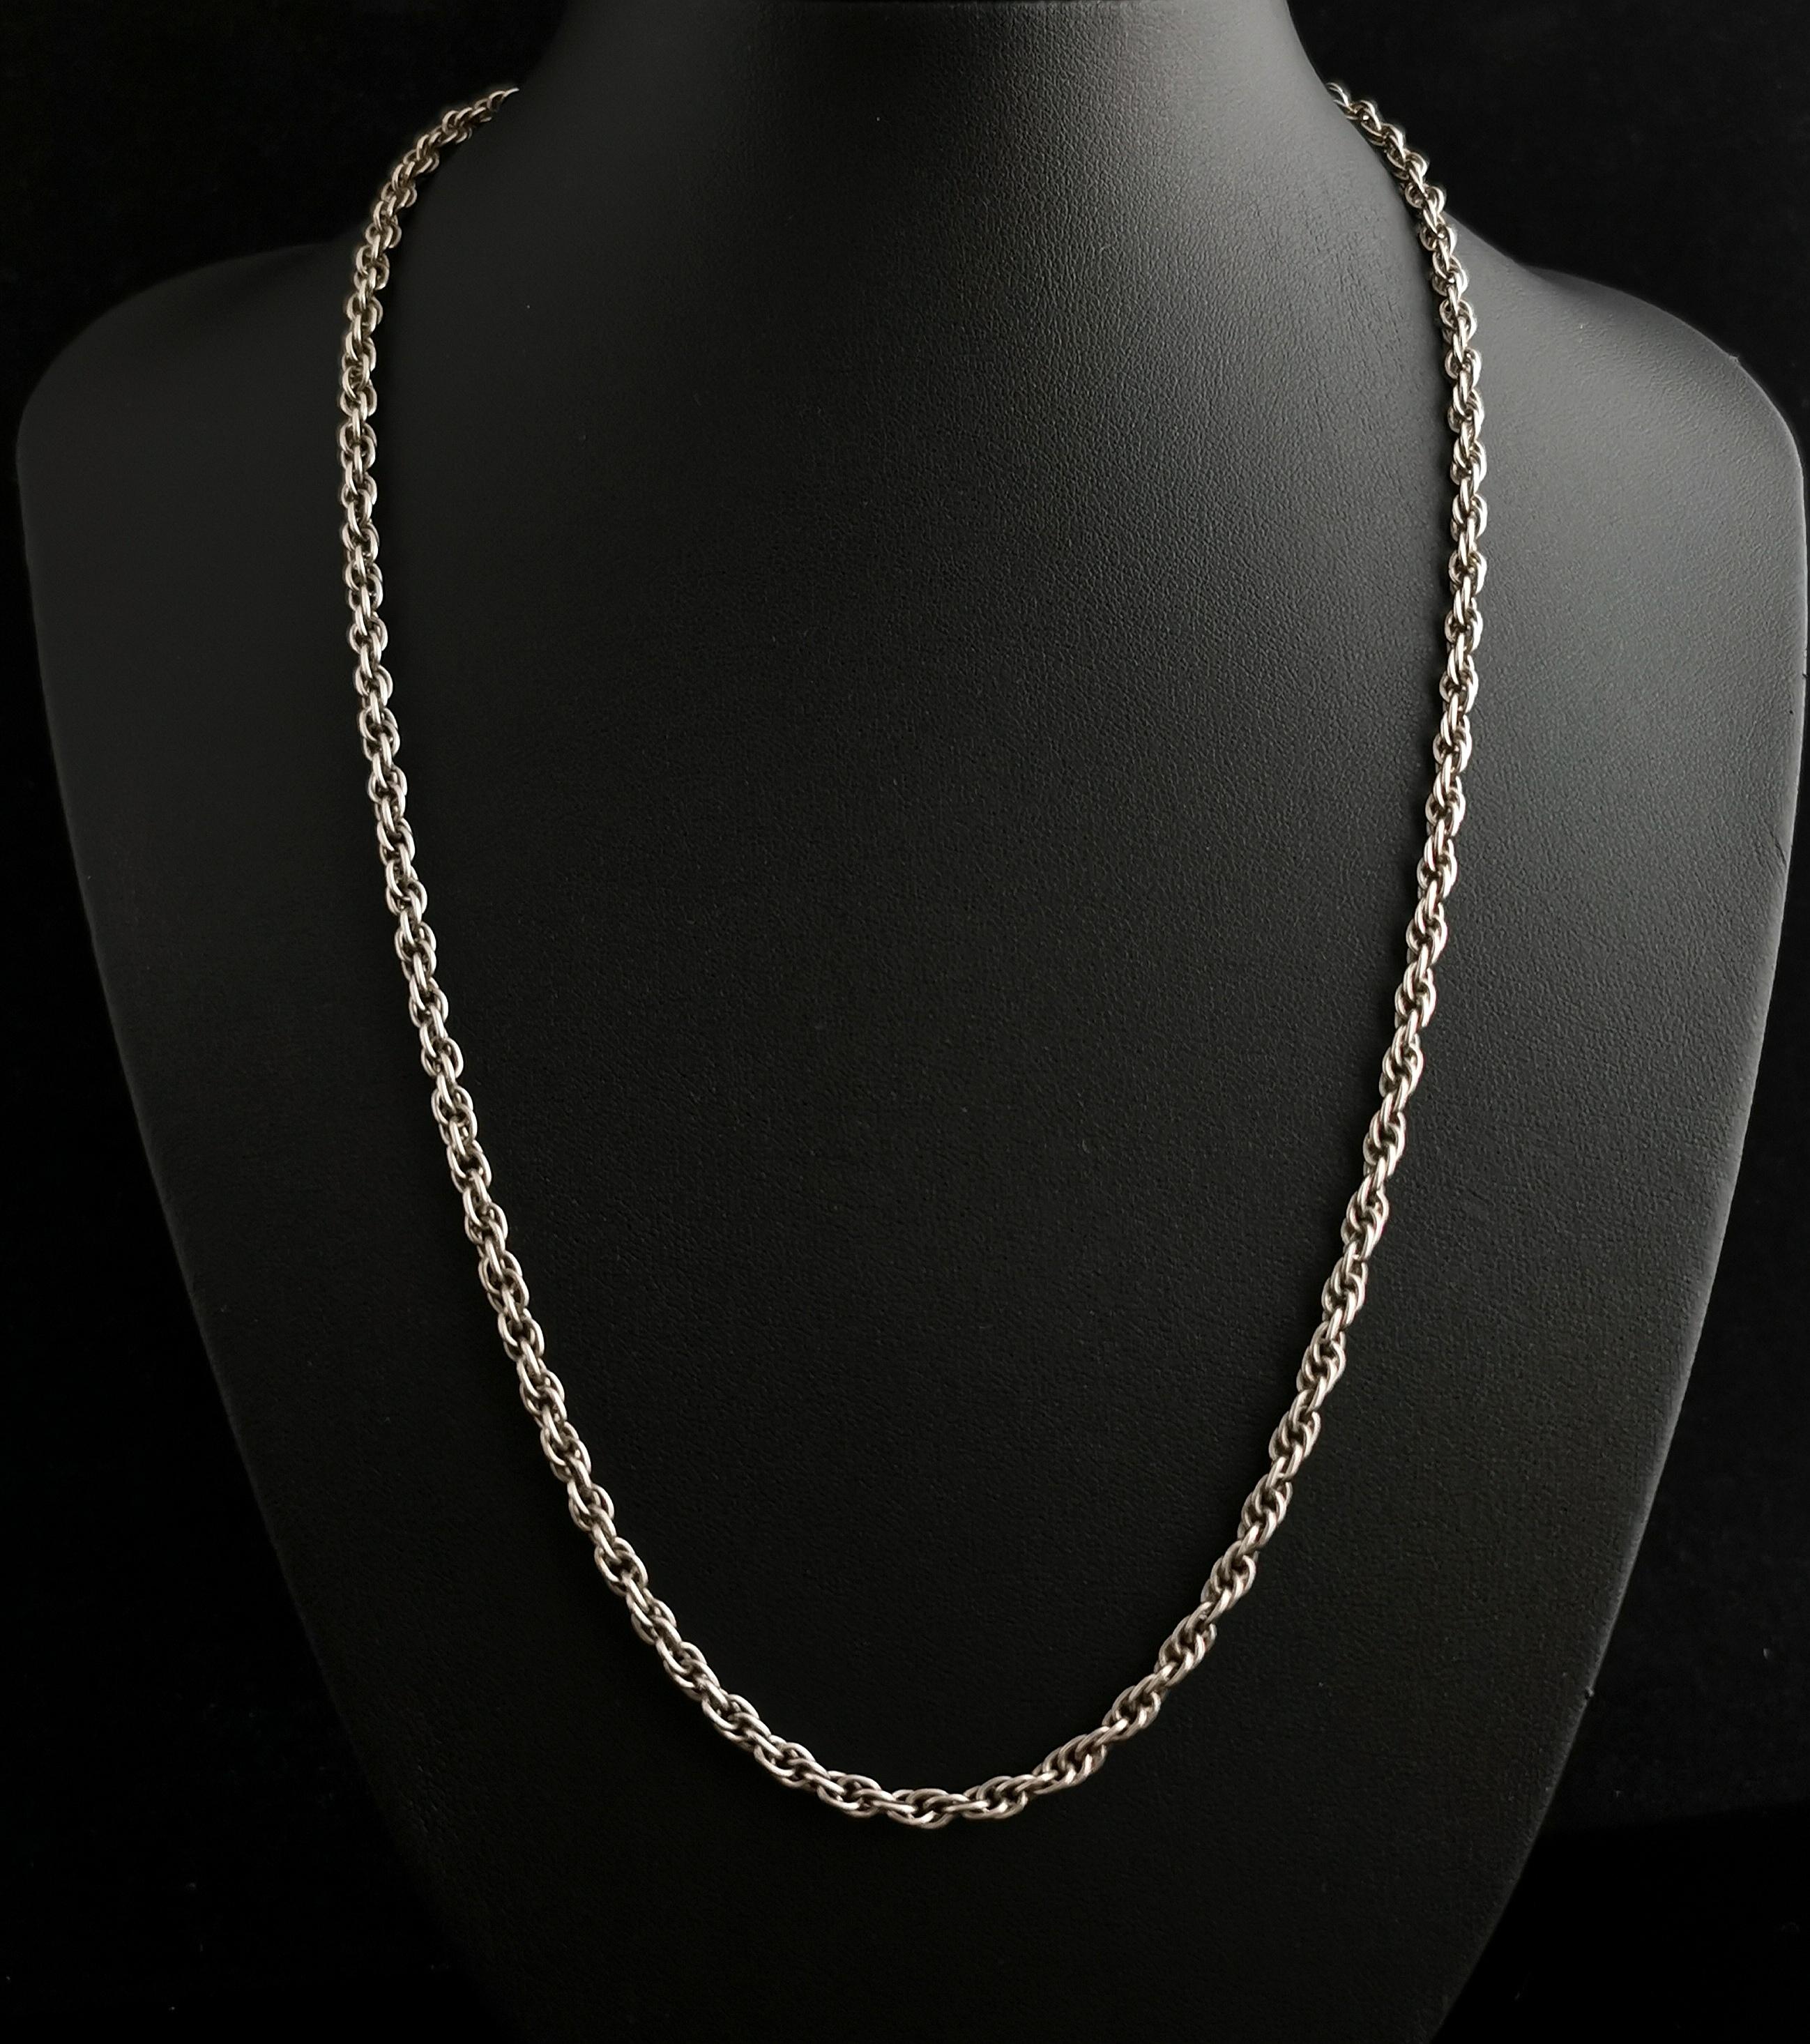 An attractive vintage c1930s sterling silver fancy rope link chain necklace.

It has a fancy elongated rope type link with a spring ring fastener marked silver.

It is a nice wearable link, perfect for adding your favourite vintage lockets or